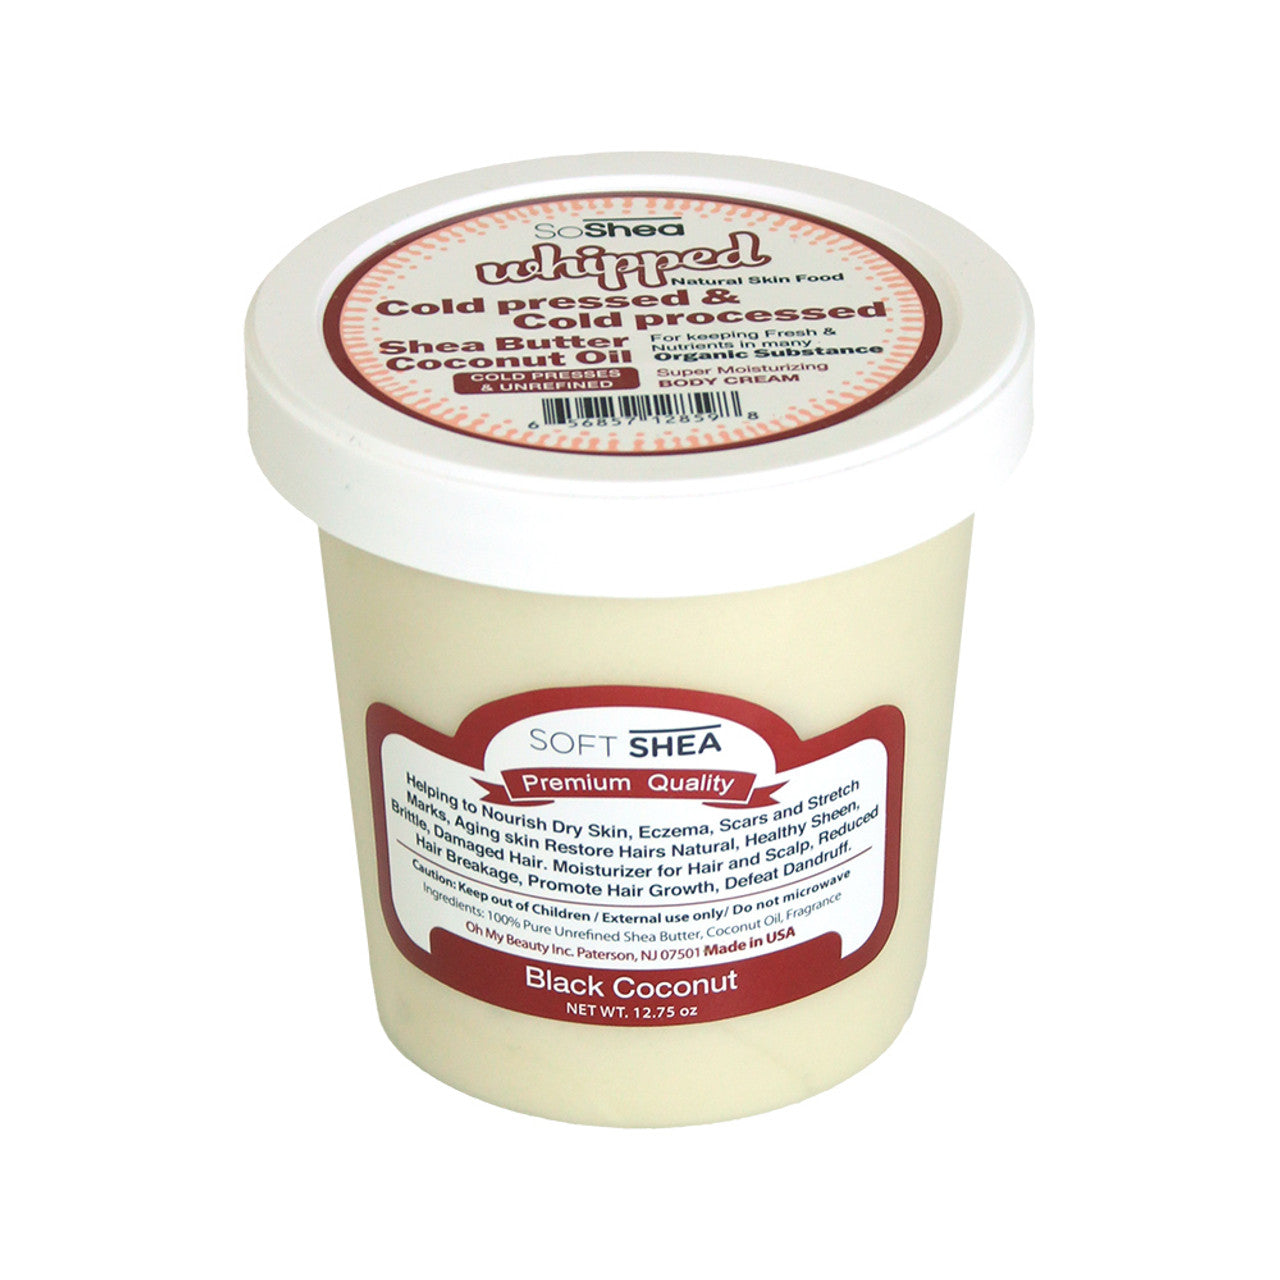 Whipped Shea Butter - Black Coconut